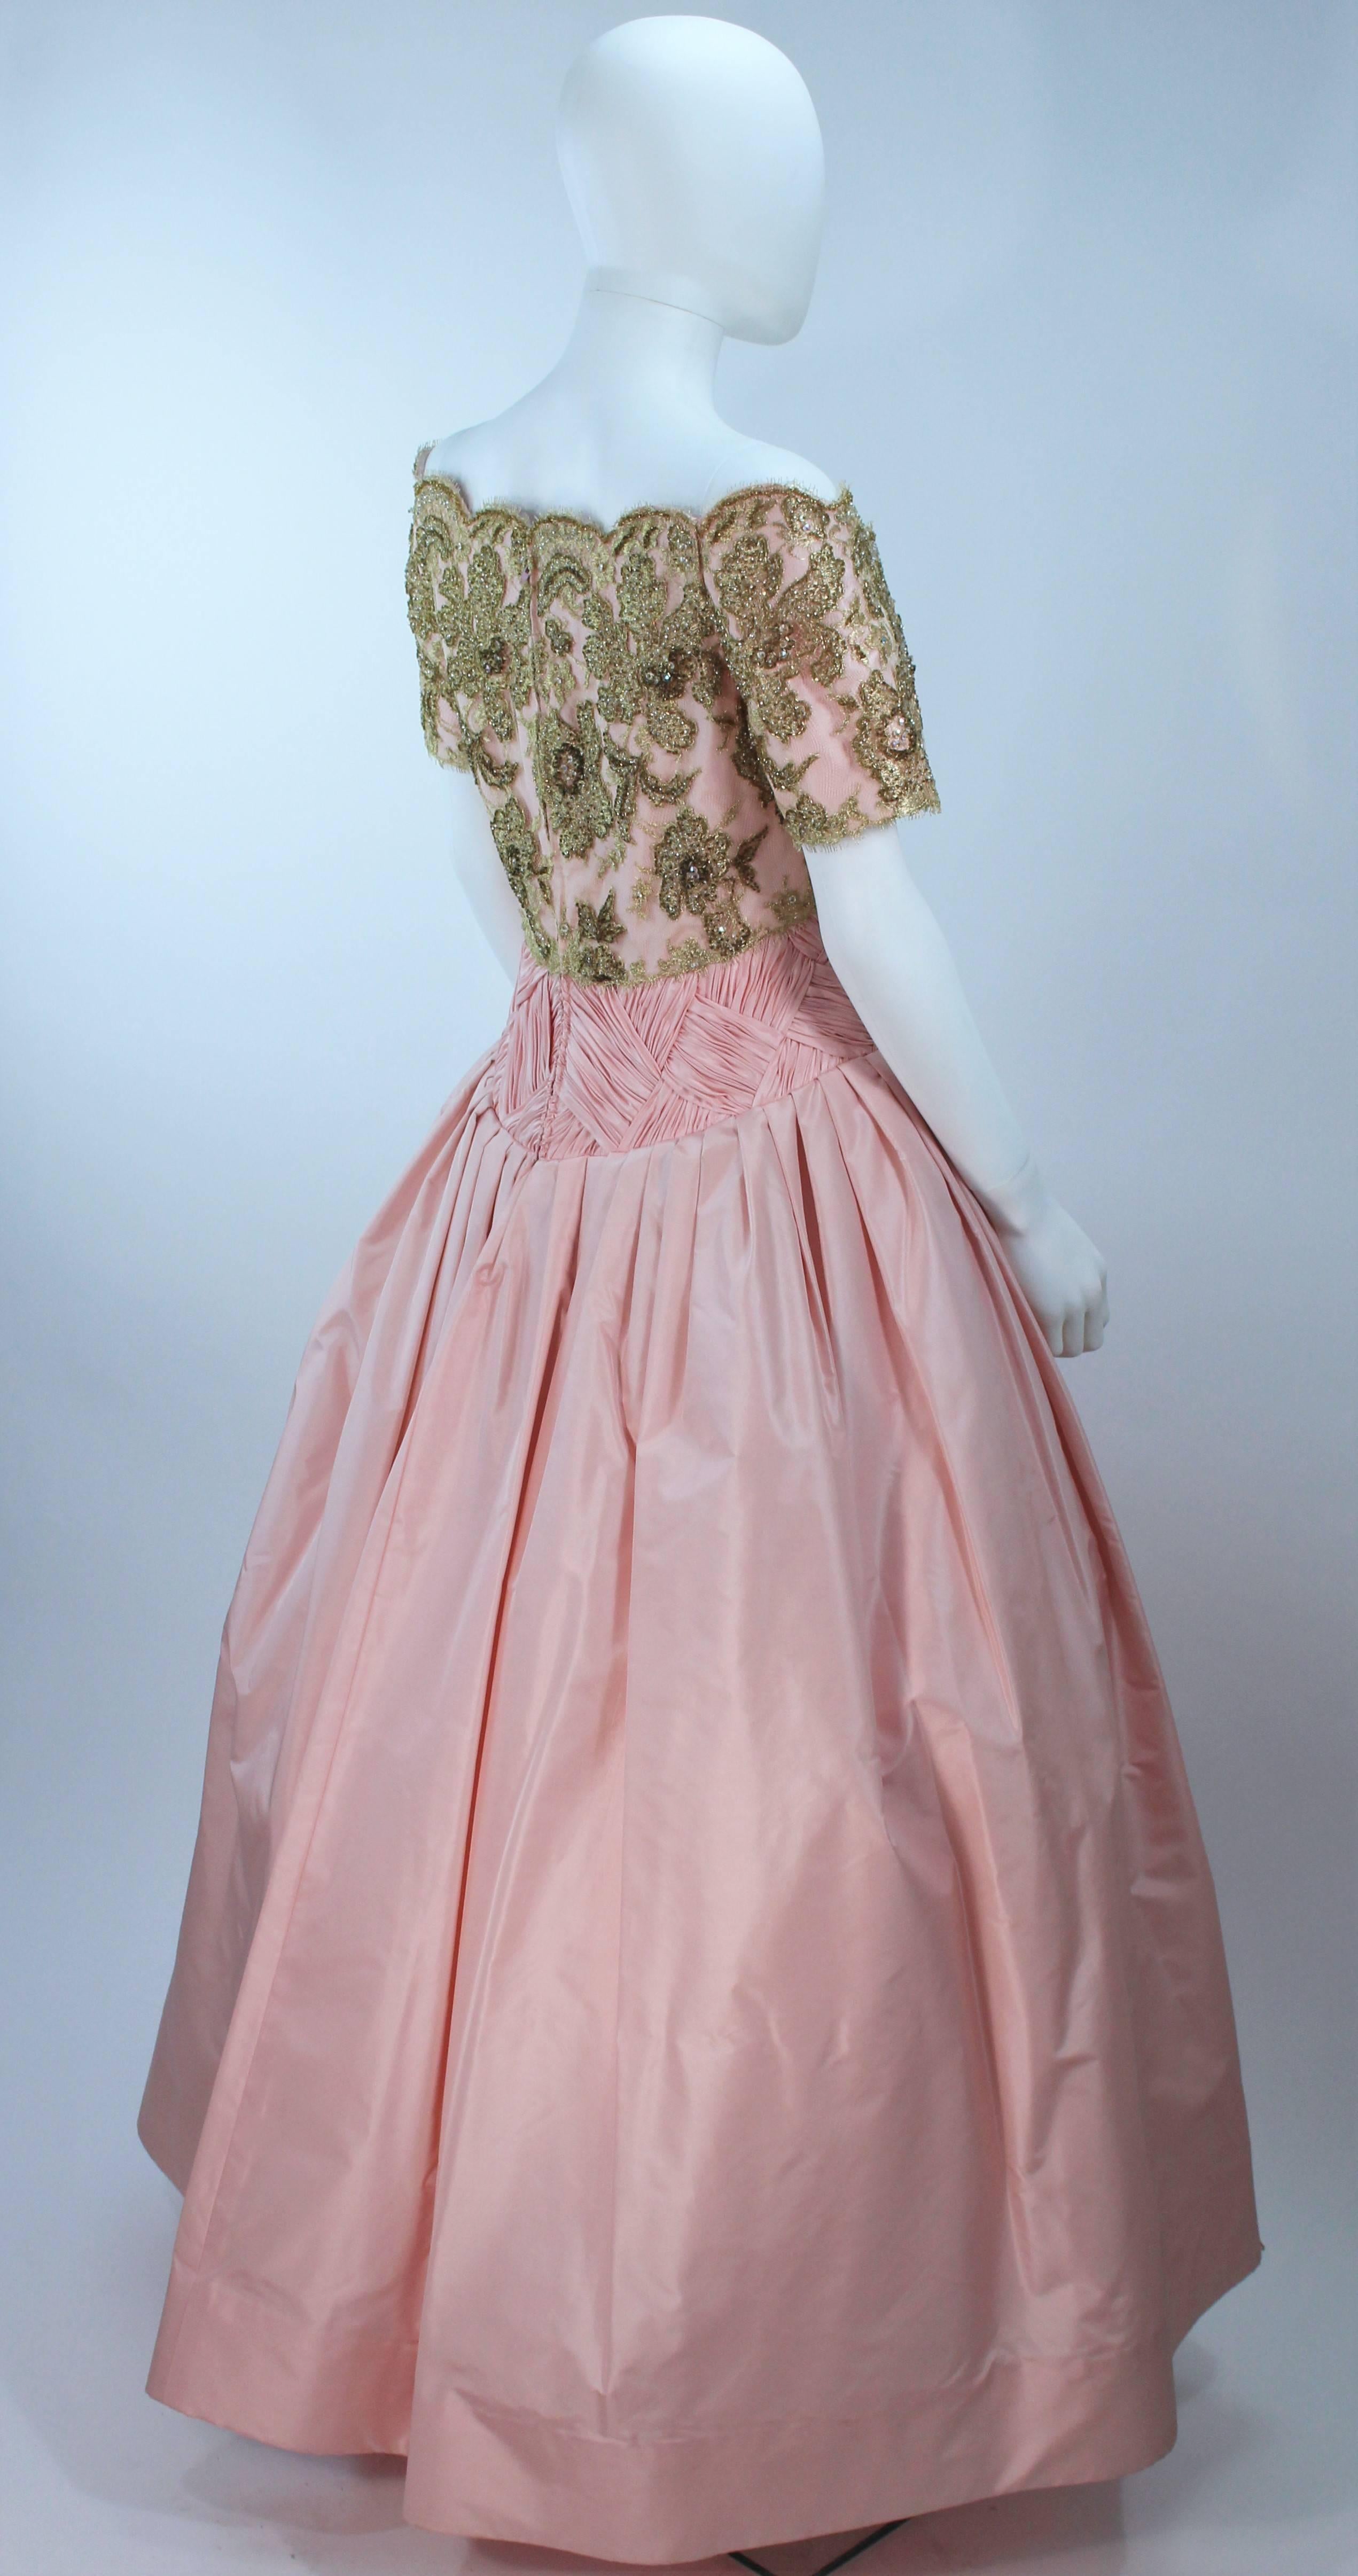 Women's VERA WANG 1980's Embellished Pink Silk Ball Gown with Gold Lace Size 10-12 For Sale